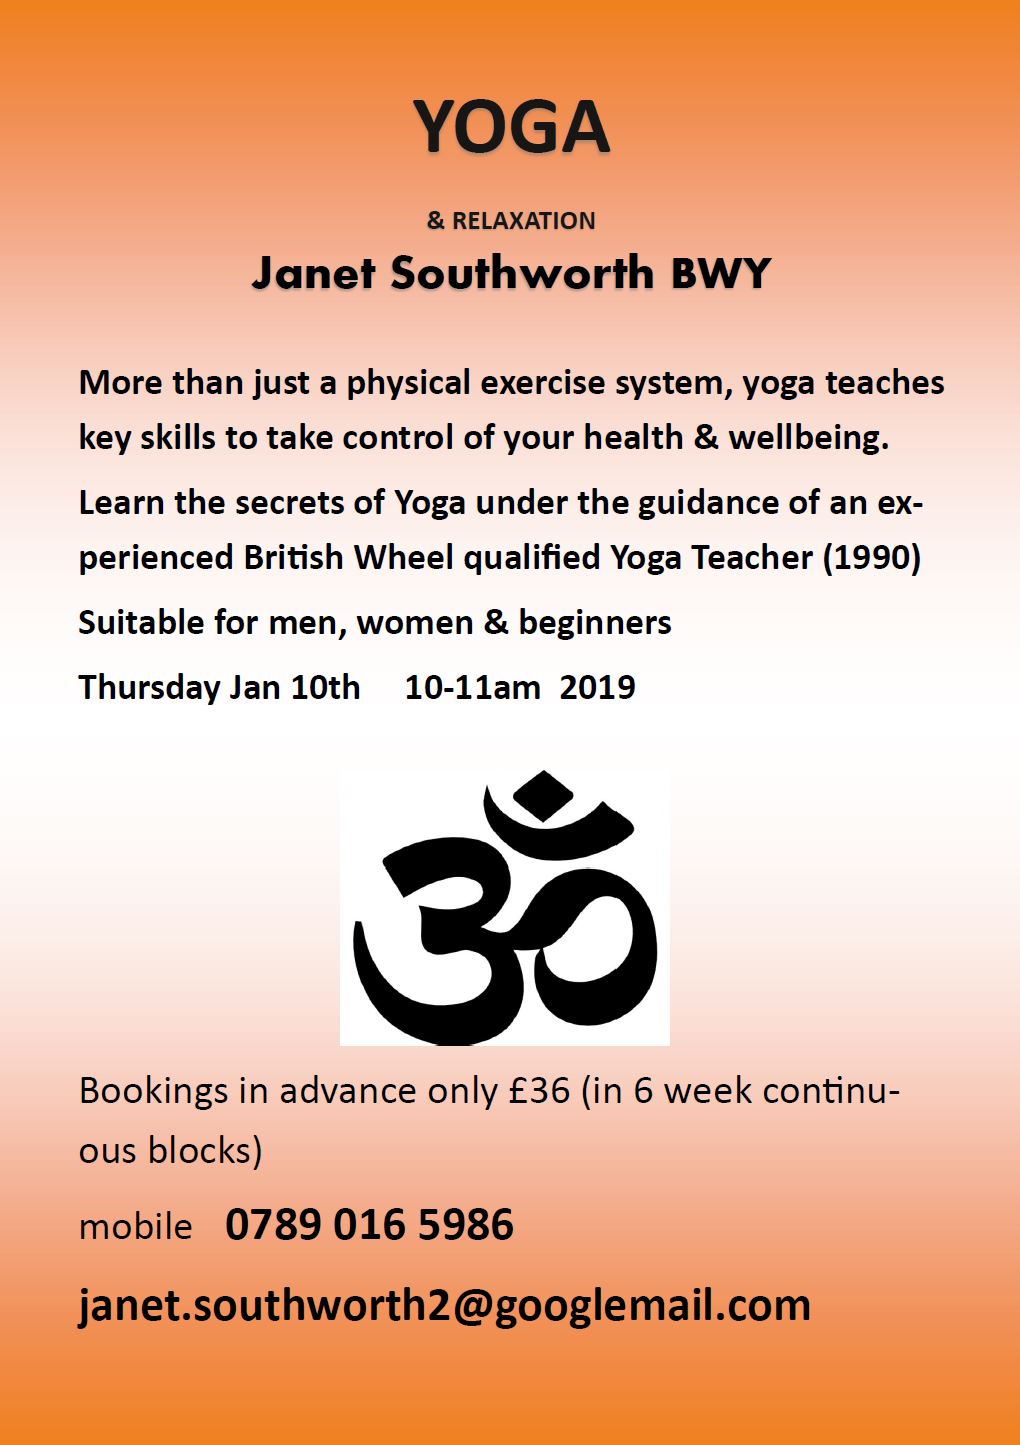 Yoga and Relaxation at Appley Bridge starting Thur 10 Jan at 10-11am - contact janet.southworth2@googlemail.com or 07890165986